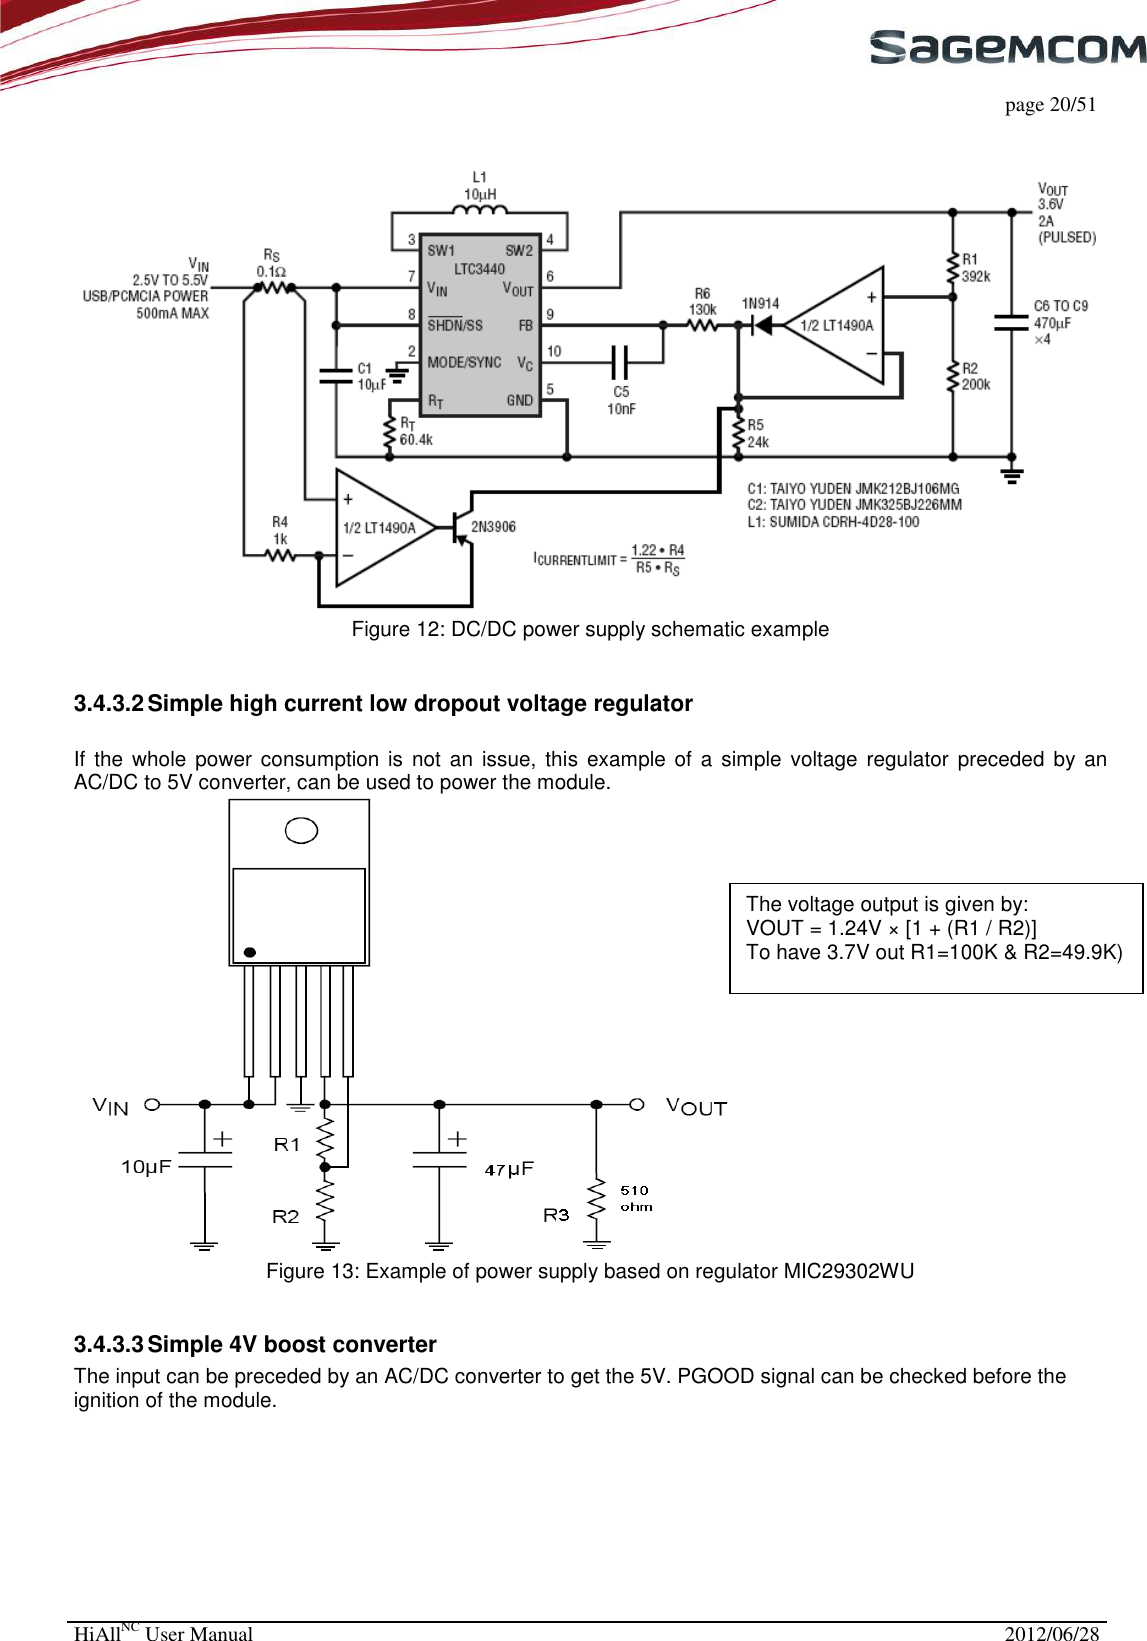     page 20/51 HiAllNC User Manual  2012/06/28     Figure 12: DC/DC power supply schematic example  3.4.3.2 Simple high current low dropout voltage regulator  If the  whole  power consumption is  not  an  issue,  this example  of  a  simple  voltage  regulator  preceded  by an AC/DC to 5V converter, can be used to power the module.  Figure 13: Example of power supply based on regulator MIC29302WU  3.4.3.3 Simple 4V boost converter The input can be preceded by an AC/DC converter to get the 5V. PGOOD signal can be checked before the ignition of the module. The voltage output is given by:  VOUT = 1.24V × [1 + (R1 / R2)] To have 3.7V out R1=100K &amp; R2=49.9K)  